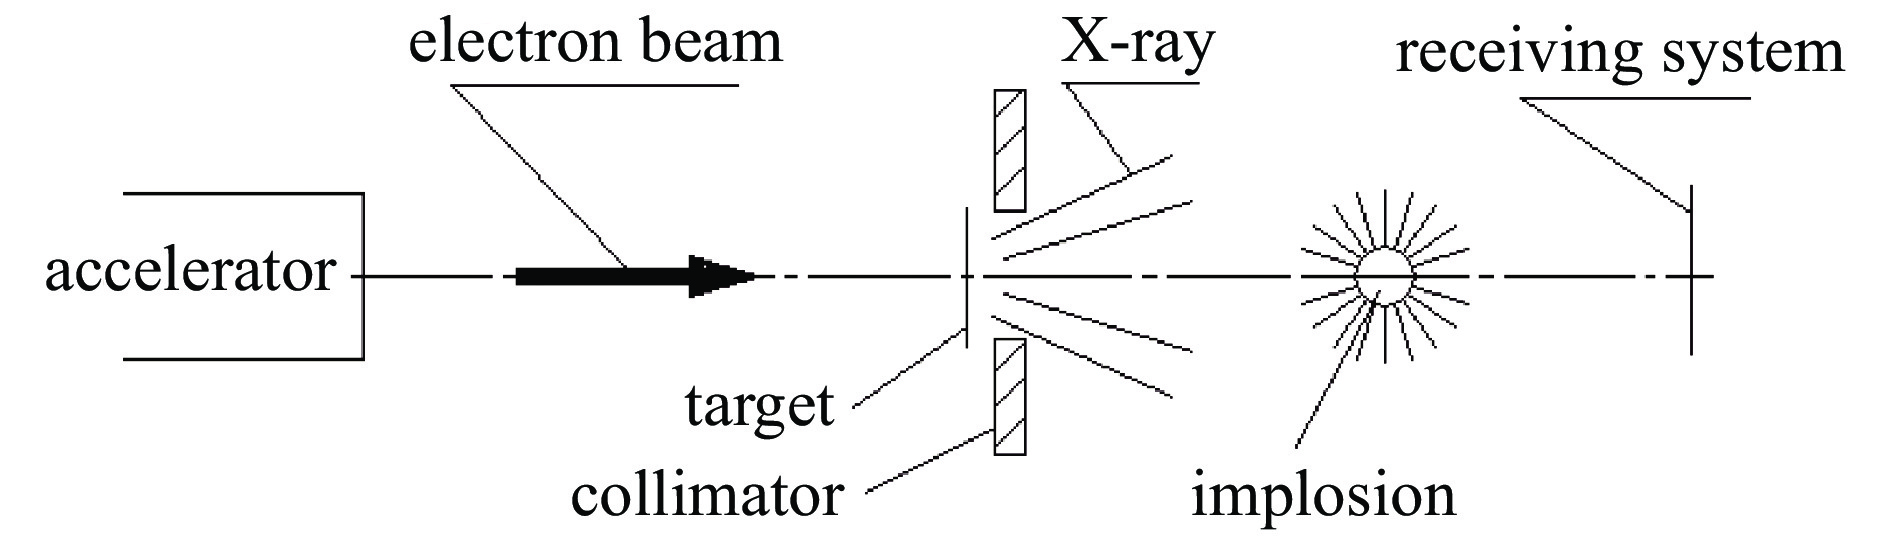 Components of flash X-ray radiography system